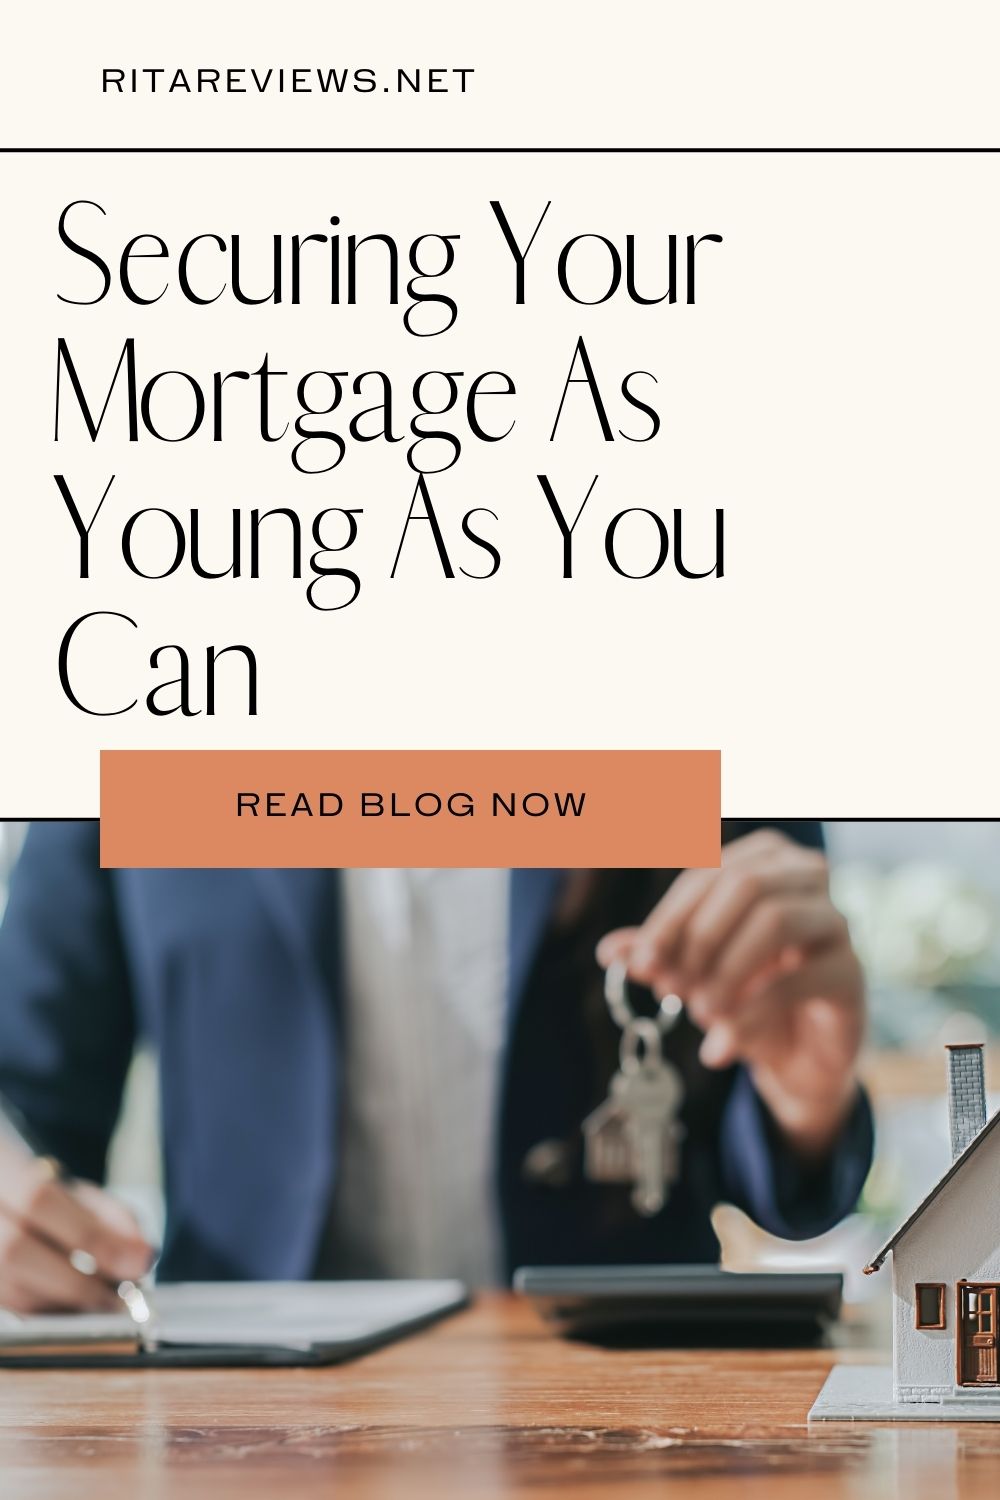 Securing Your Mortgage As Young As You Can